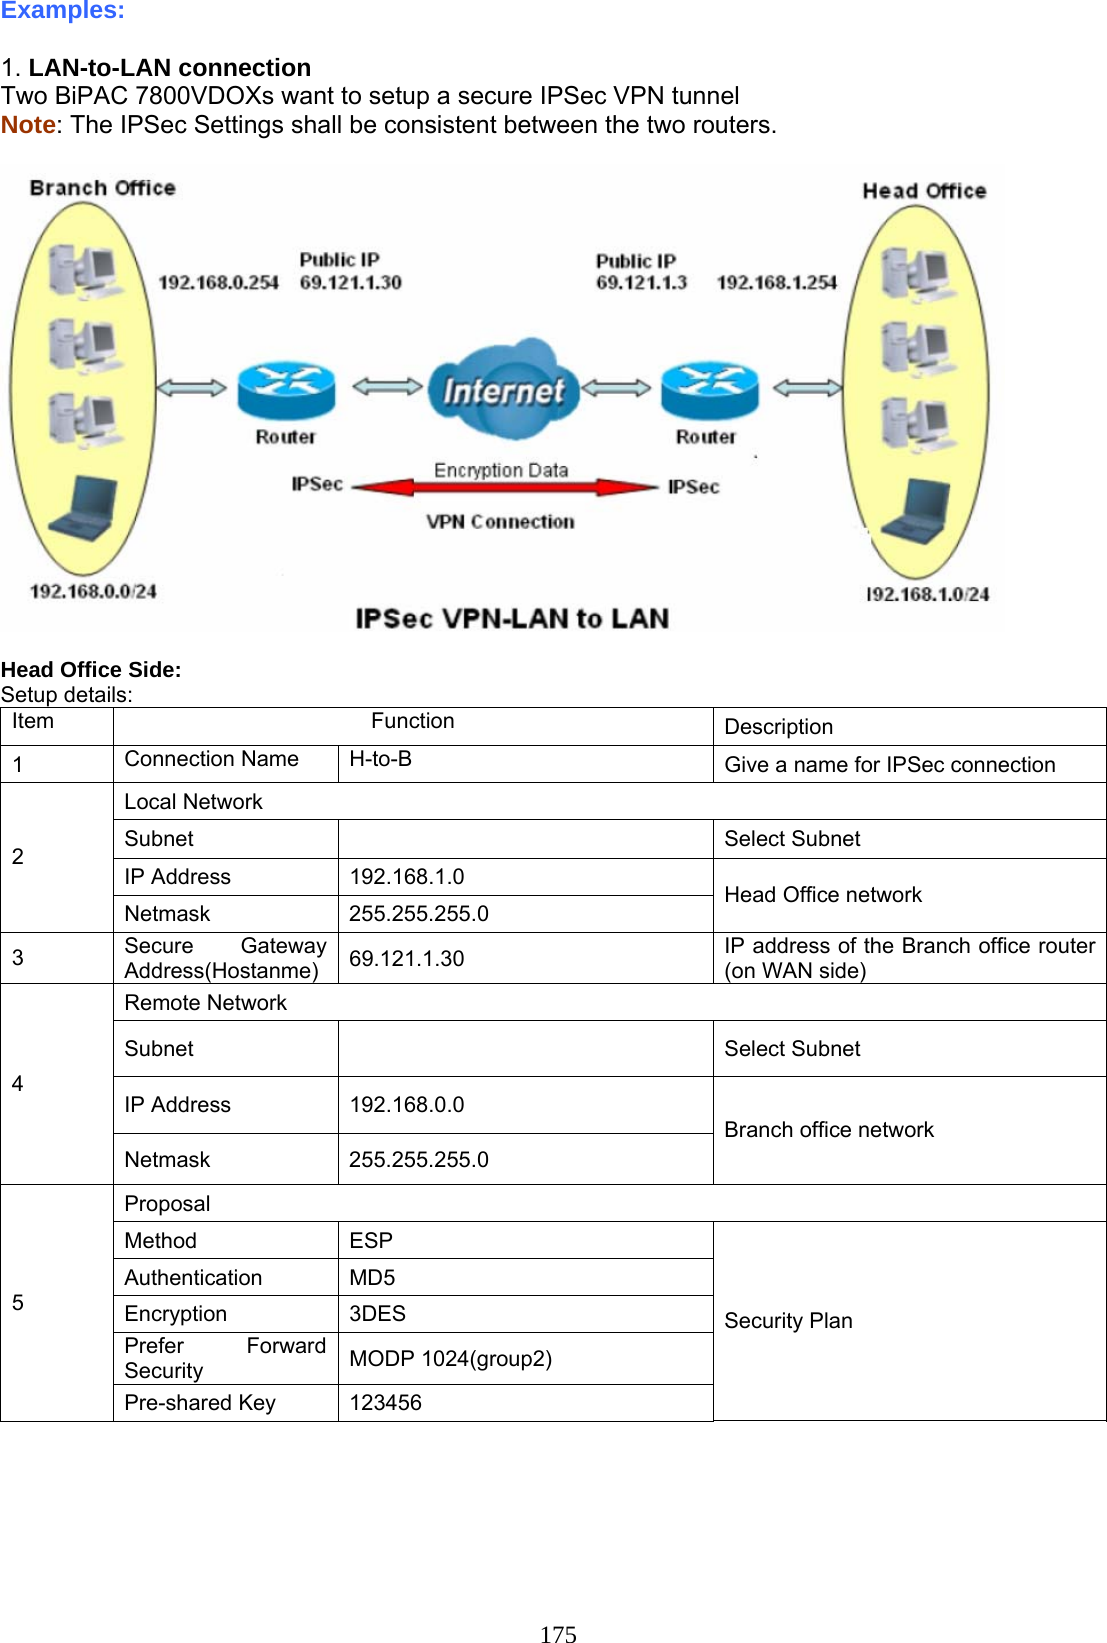 175 Examples:   1. LAN-to-LAN connection Two BiPAC 7800VDOXs want to setup a secure IPSec VPN tunnel  Note: The IPSec Settings shall be consistent between the two routers.    Head Office Side: Setup details: Item Function Description 1  Connection Name  H-to-B  Give a name for IPSec connection Local Network Subnet   Select Subnet  IP Address  192.168.1.0 2 Netmask 255.255.255.0  Head Office network 3  Secure Gateway Address(Hostanme)  69.121.1.30  IP address of the Branch office router (on WAN side) Remote Network Subnet   Select Subnet IP Address  192.168.0.0 4 Netmask 255.255.255.0 Branch office network Proposal Method   ESP Authentication MD5 Encryption   3DES Prefer Forward Security   MODP 1024(group2) 5 Pre-shared Key  123456 Security Plan 